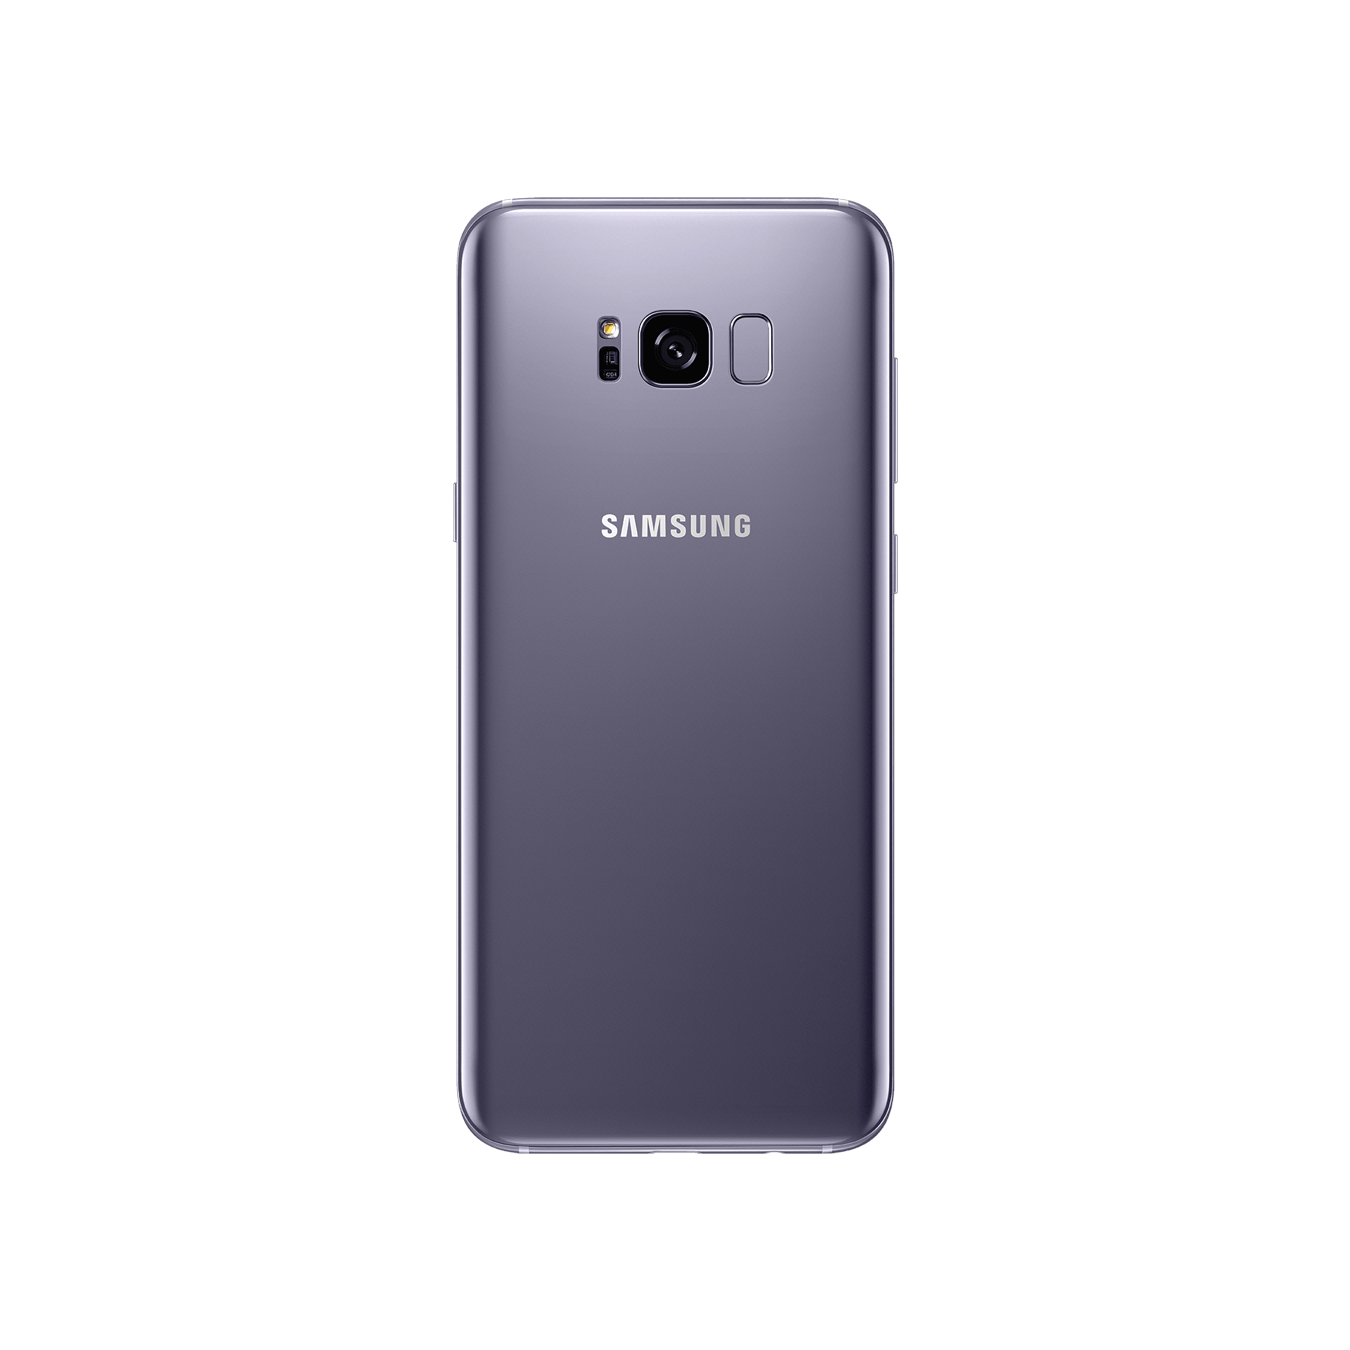 Samsung Galaxy S8 & S8 Plus network unlock, remove SIM restrictions for global use, available at cleanimei.com